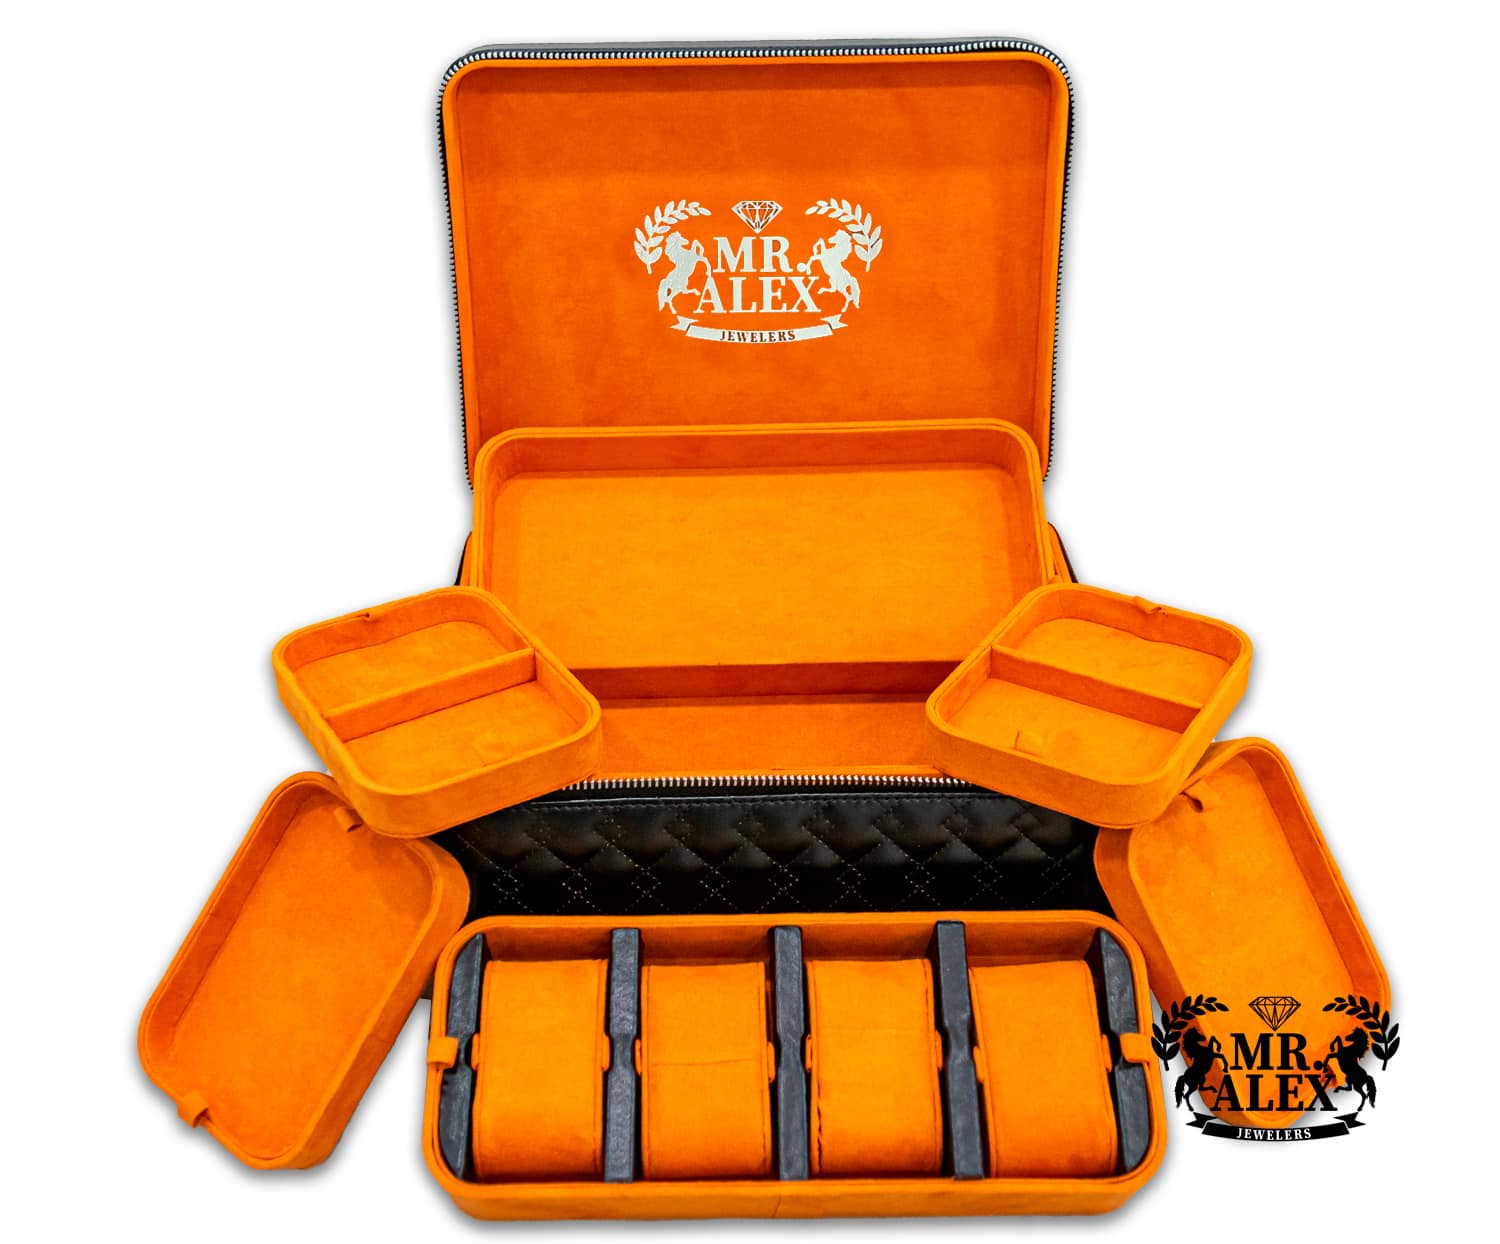 Leather Jewelry Orange Case - 4 Watches and Five Stackable Trays - Mr. Alex Jewelry